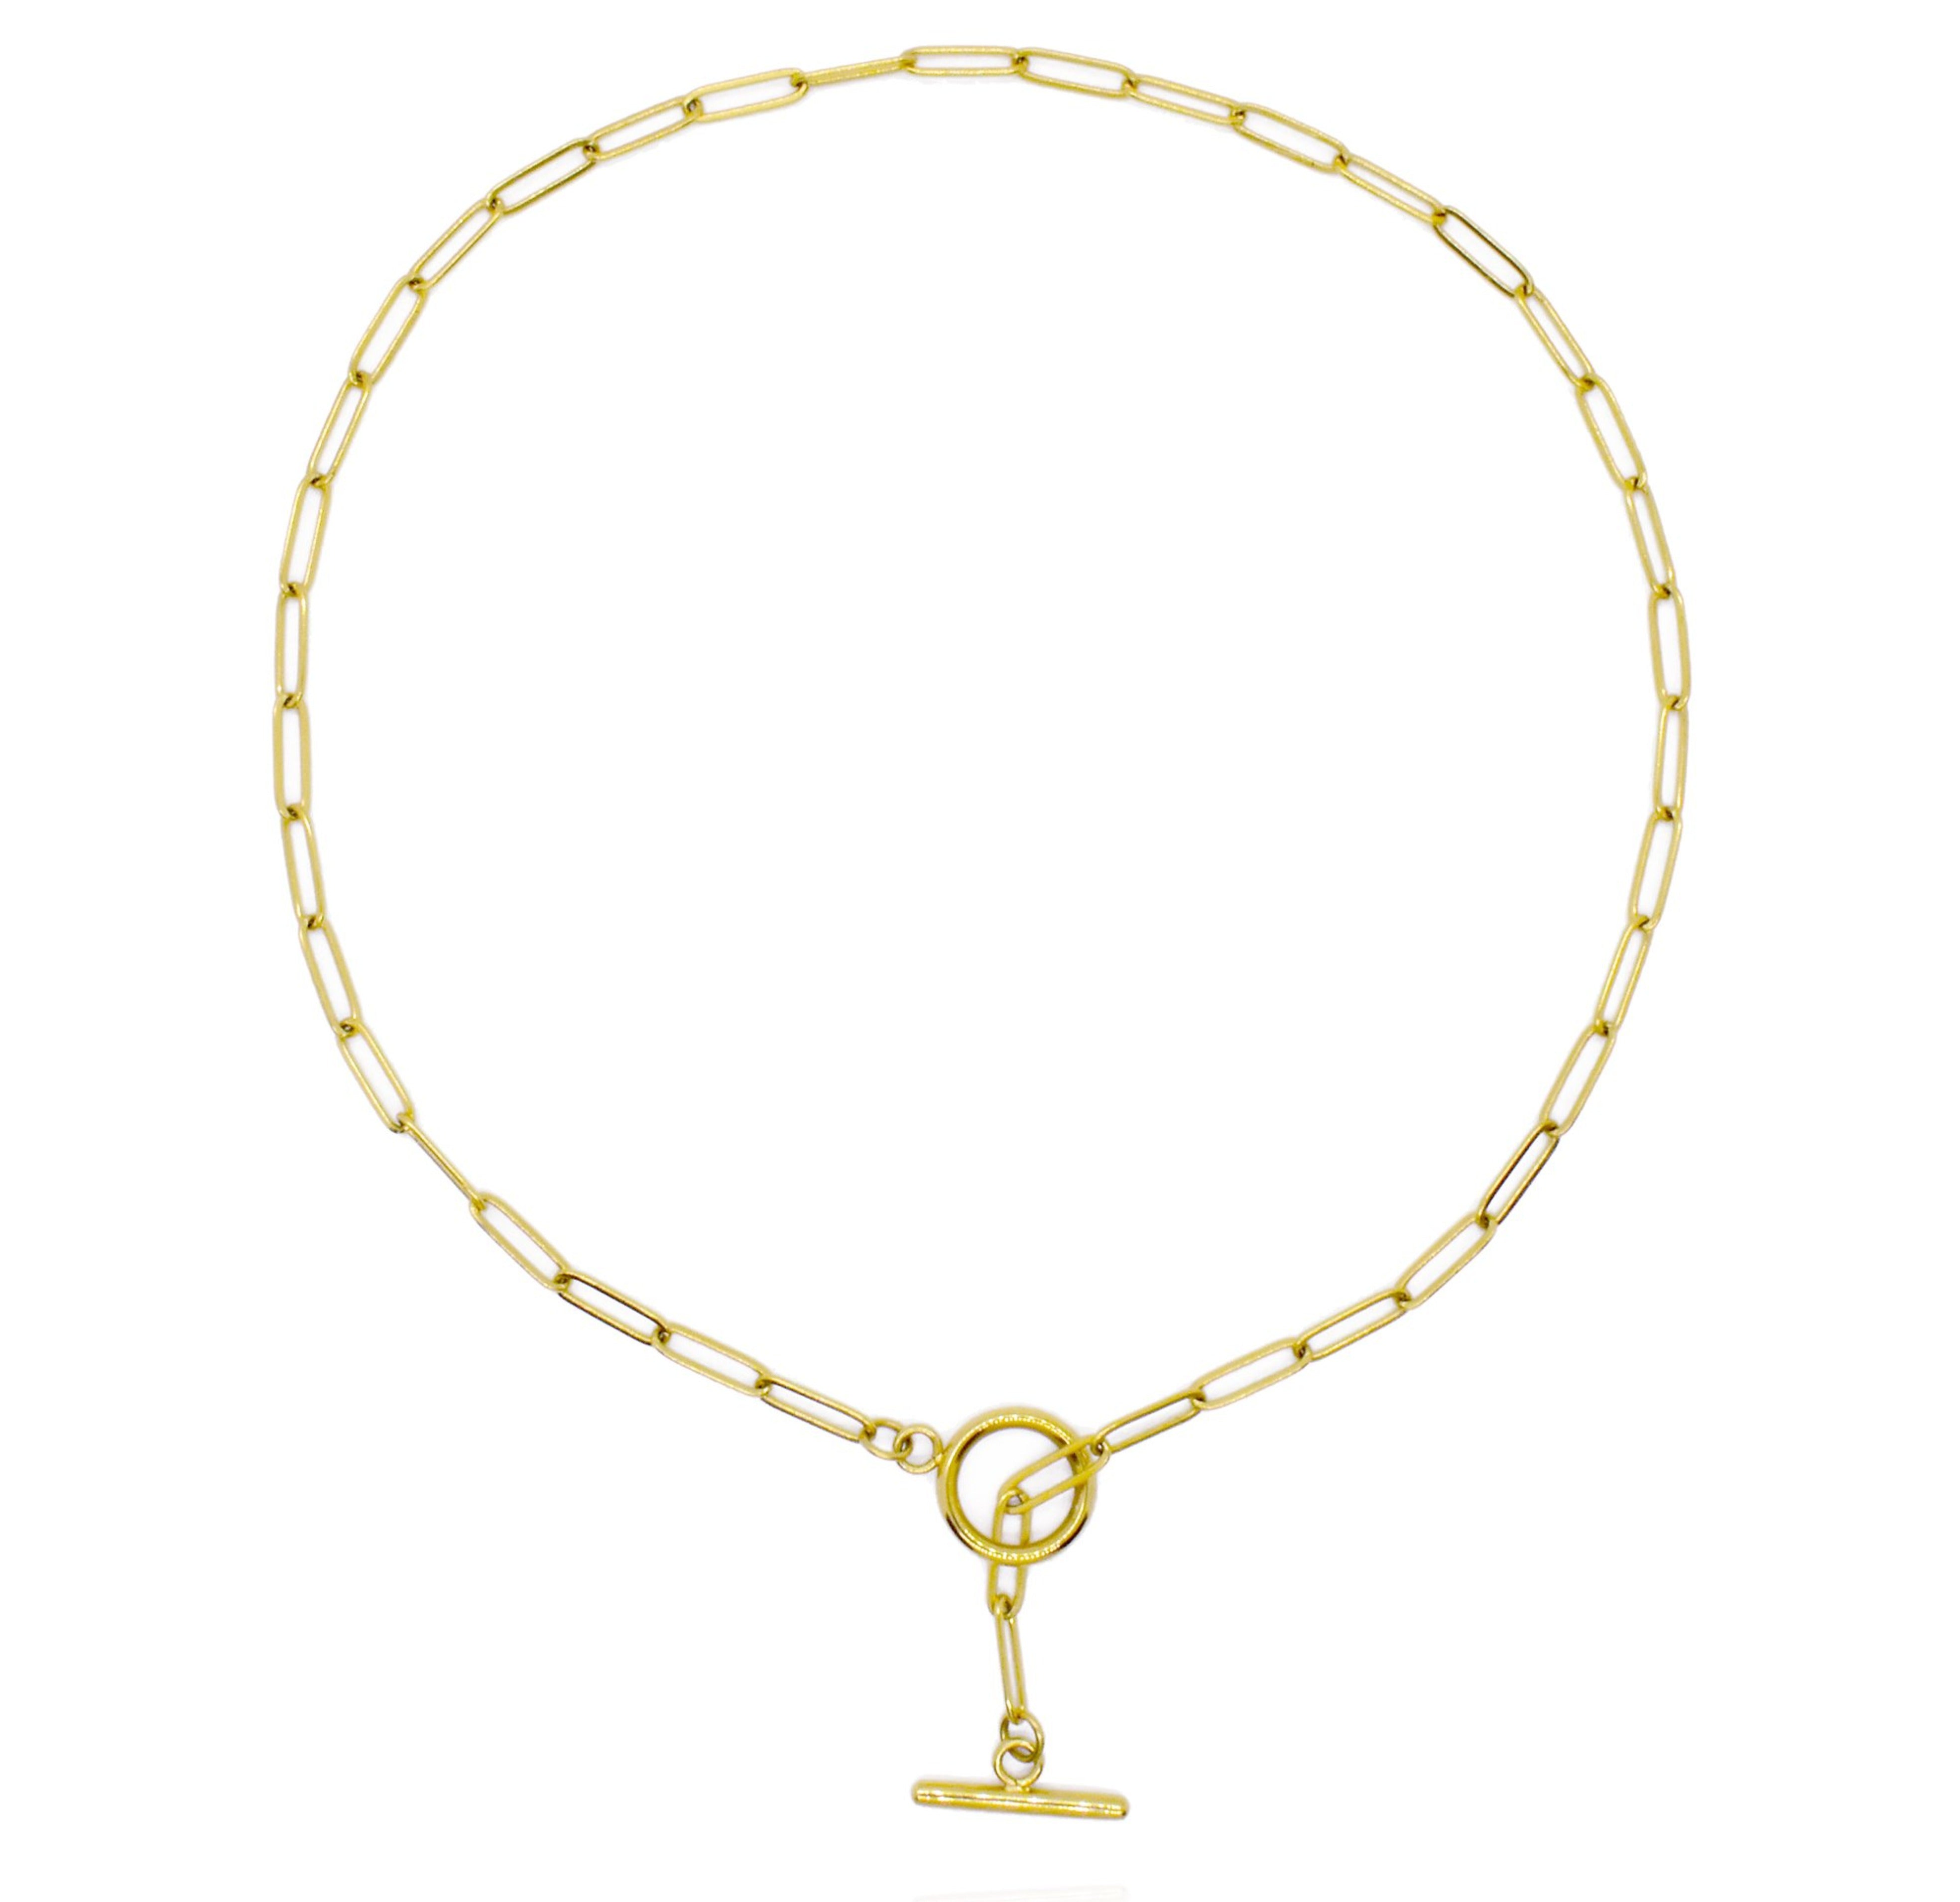 JAMIE GOLD TOGGLE PAPERCLIP CHAIN NECKLACE